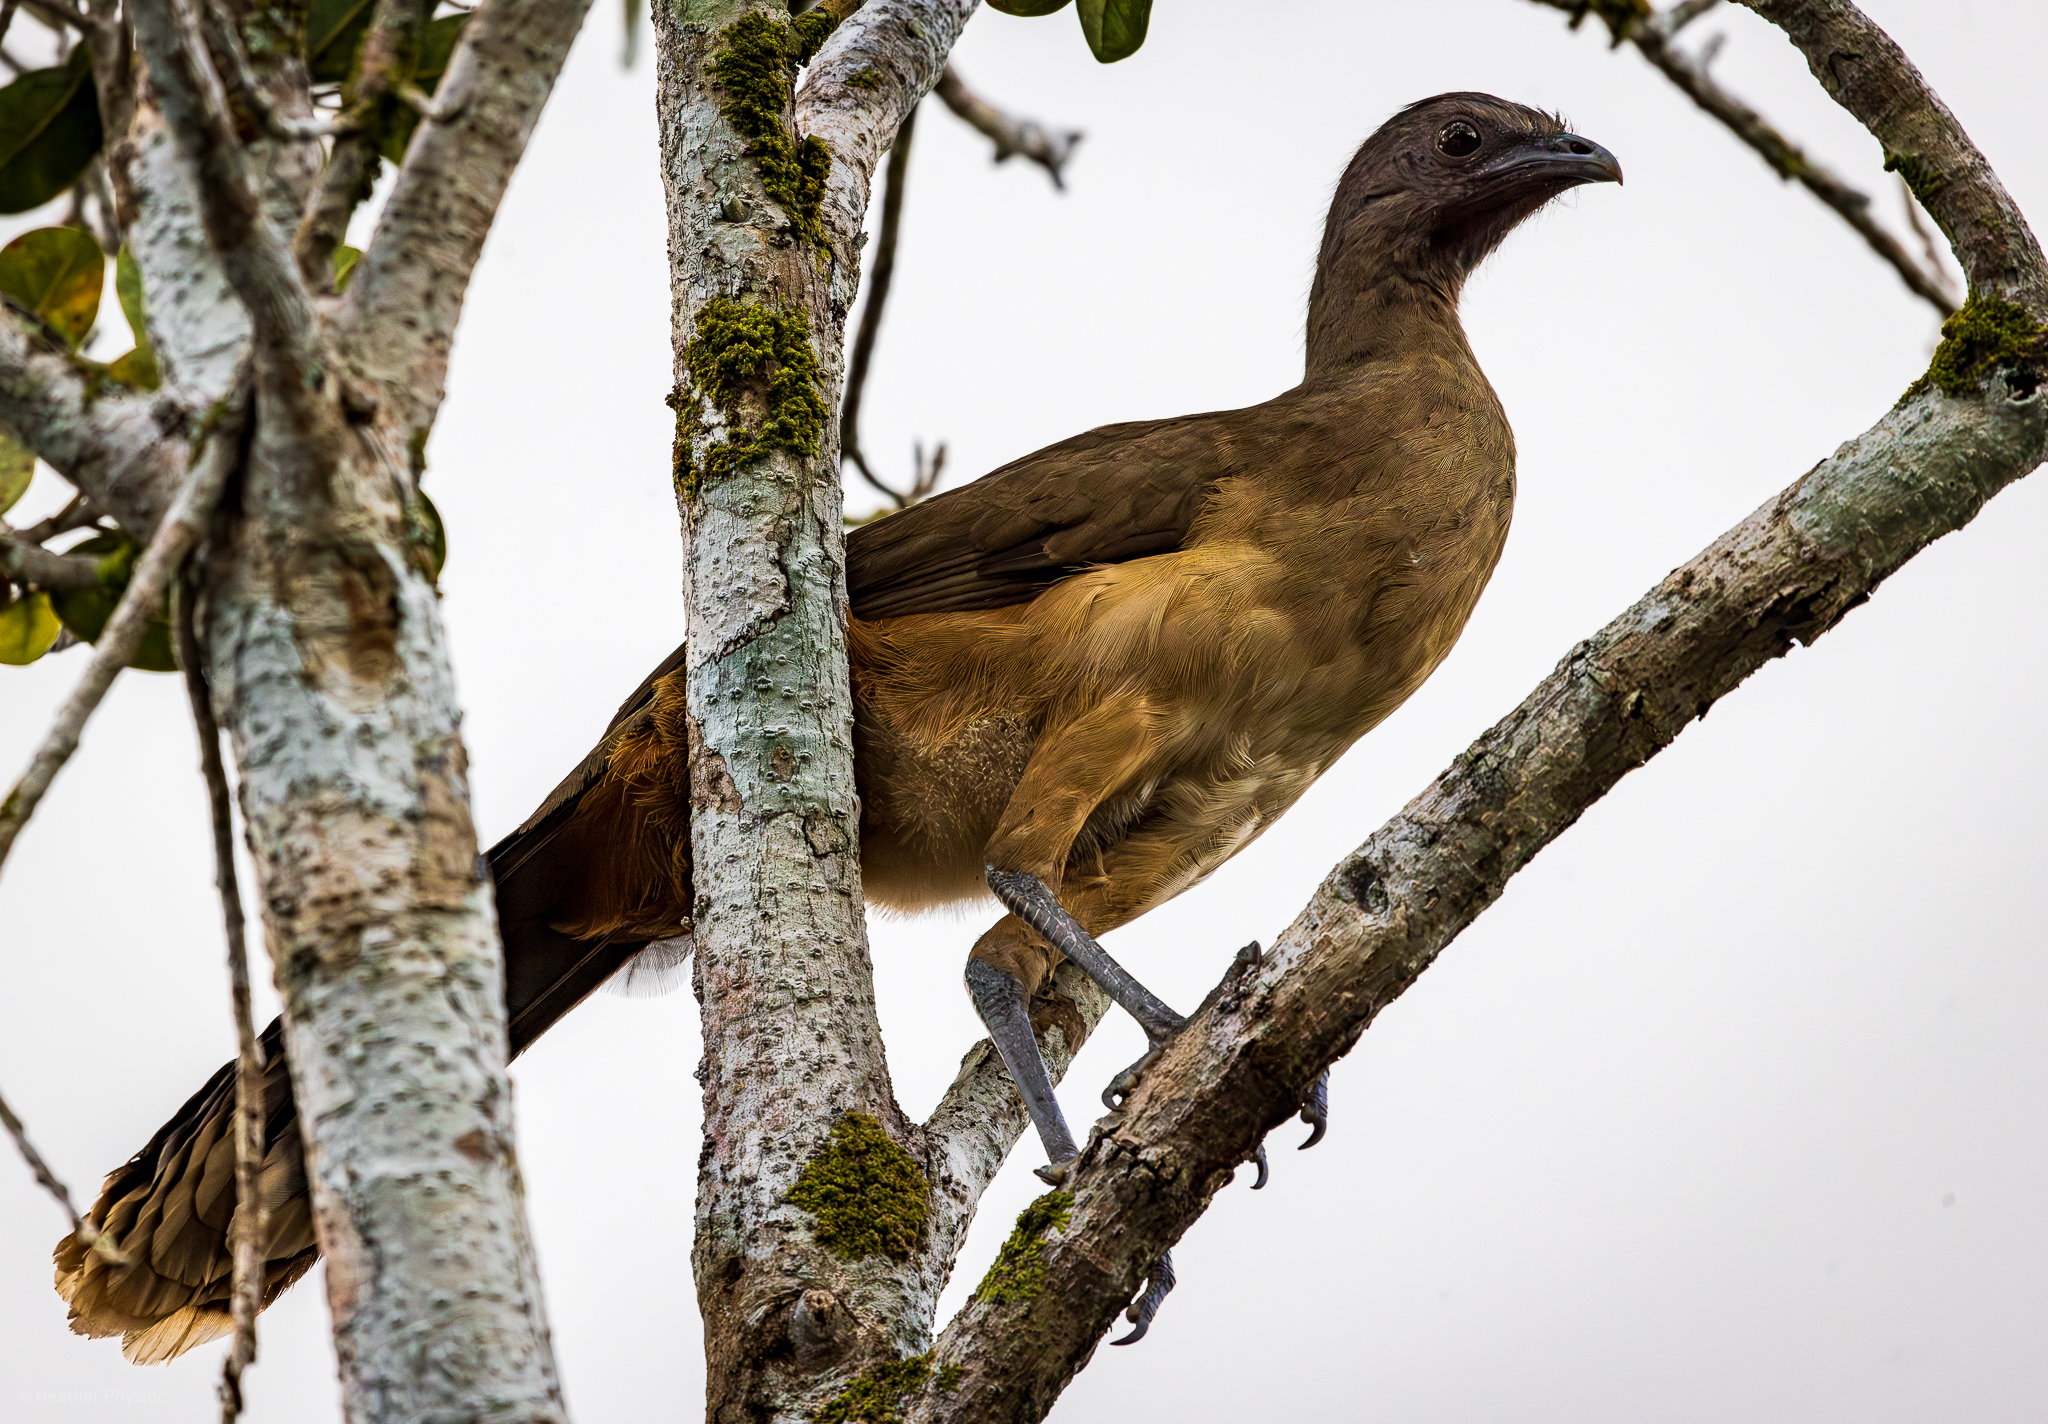 A Plain Chachalaca bird perched on a tree branch, with its brown plumage blending into the natural colors of the mossy tree in Yucatan, Mexico.